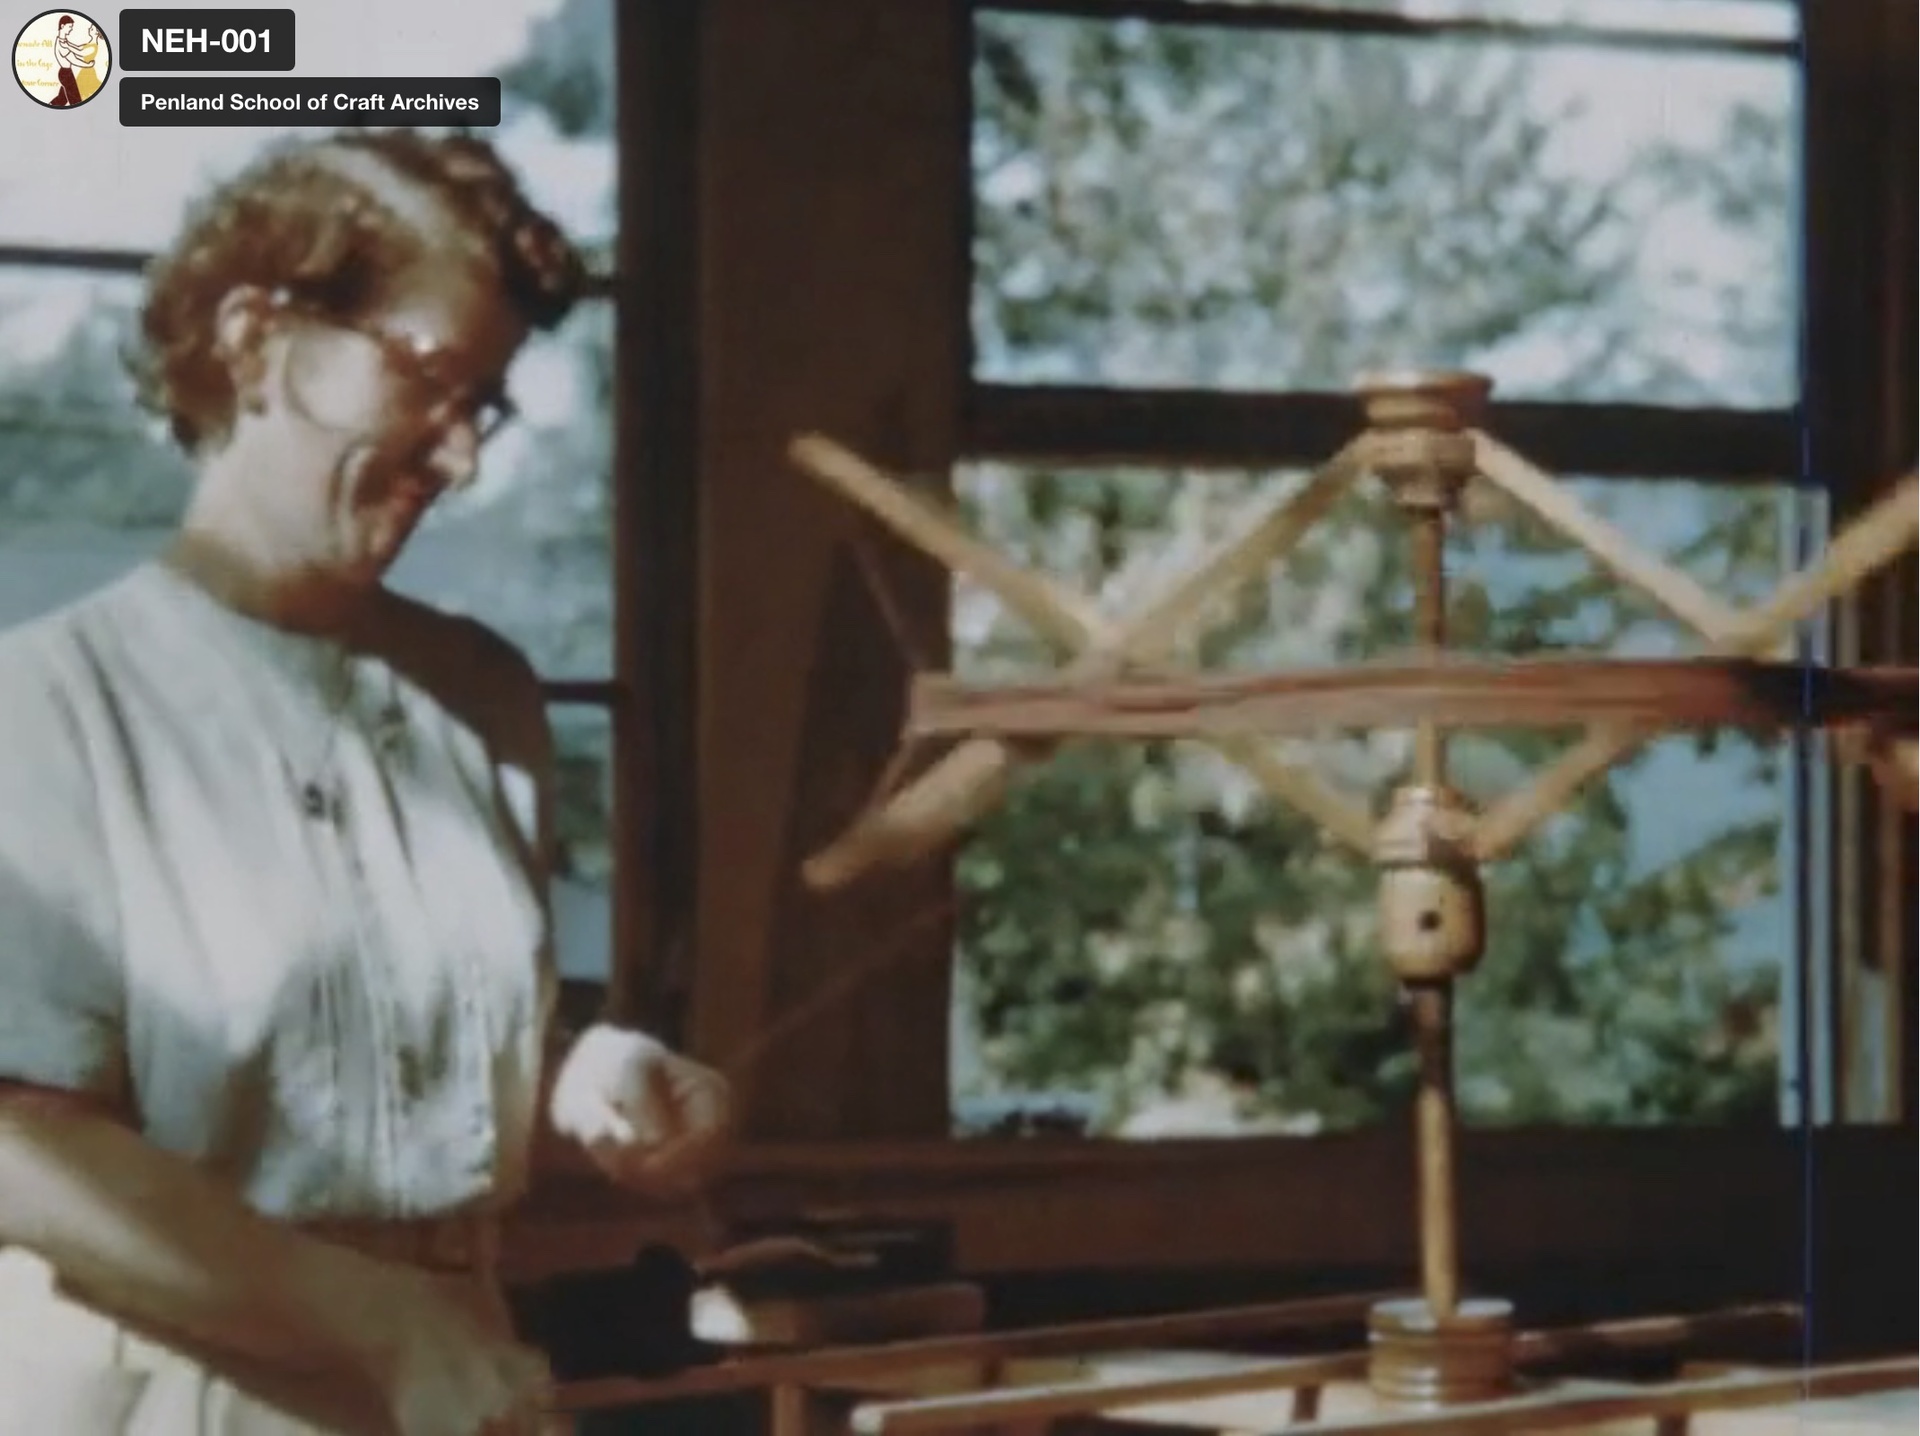 Still from 1950 film of a weaver using a yarn tree in the Penland weaving studio. Image courtesy of Penland School of Craft.